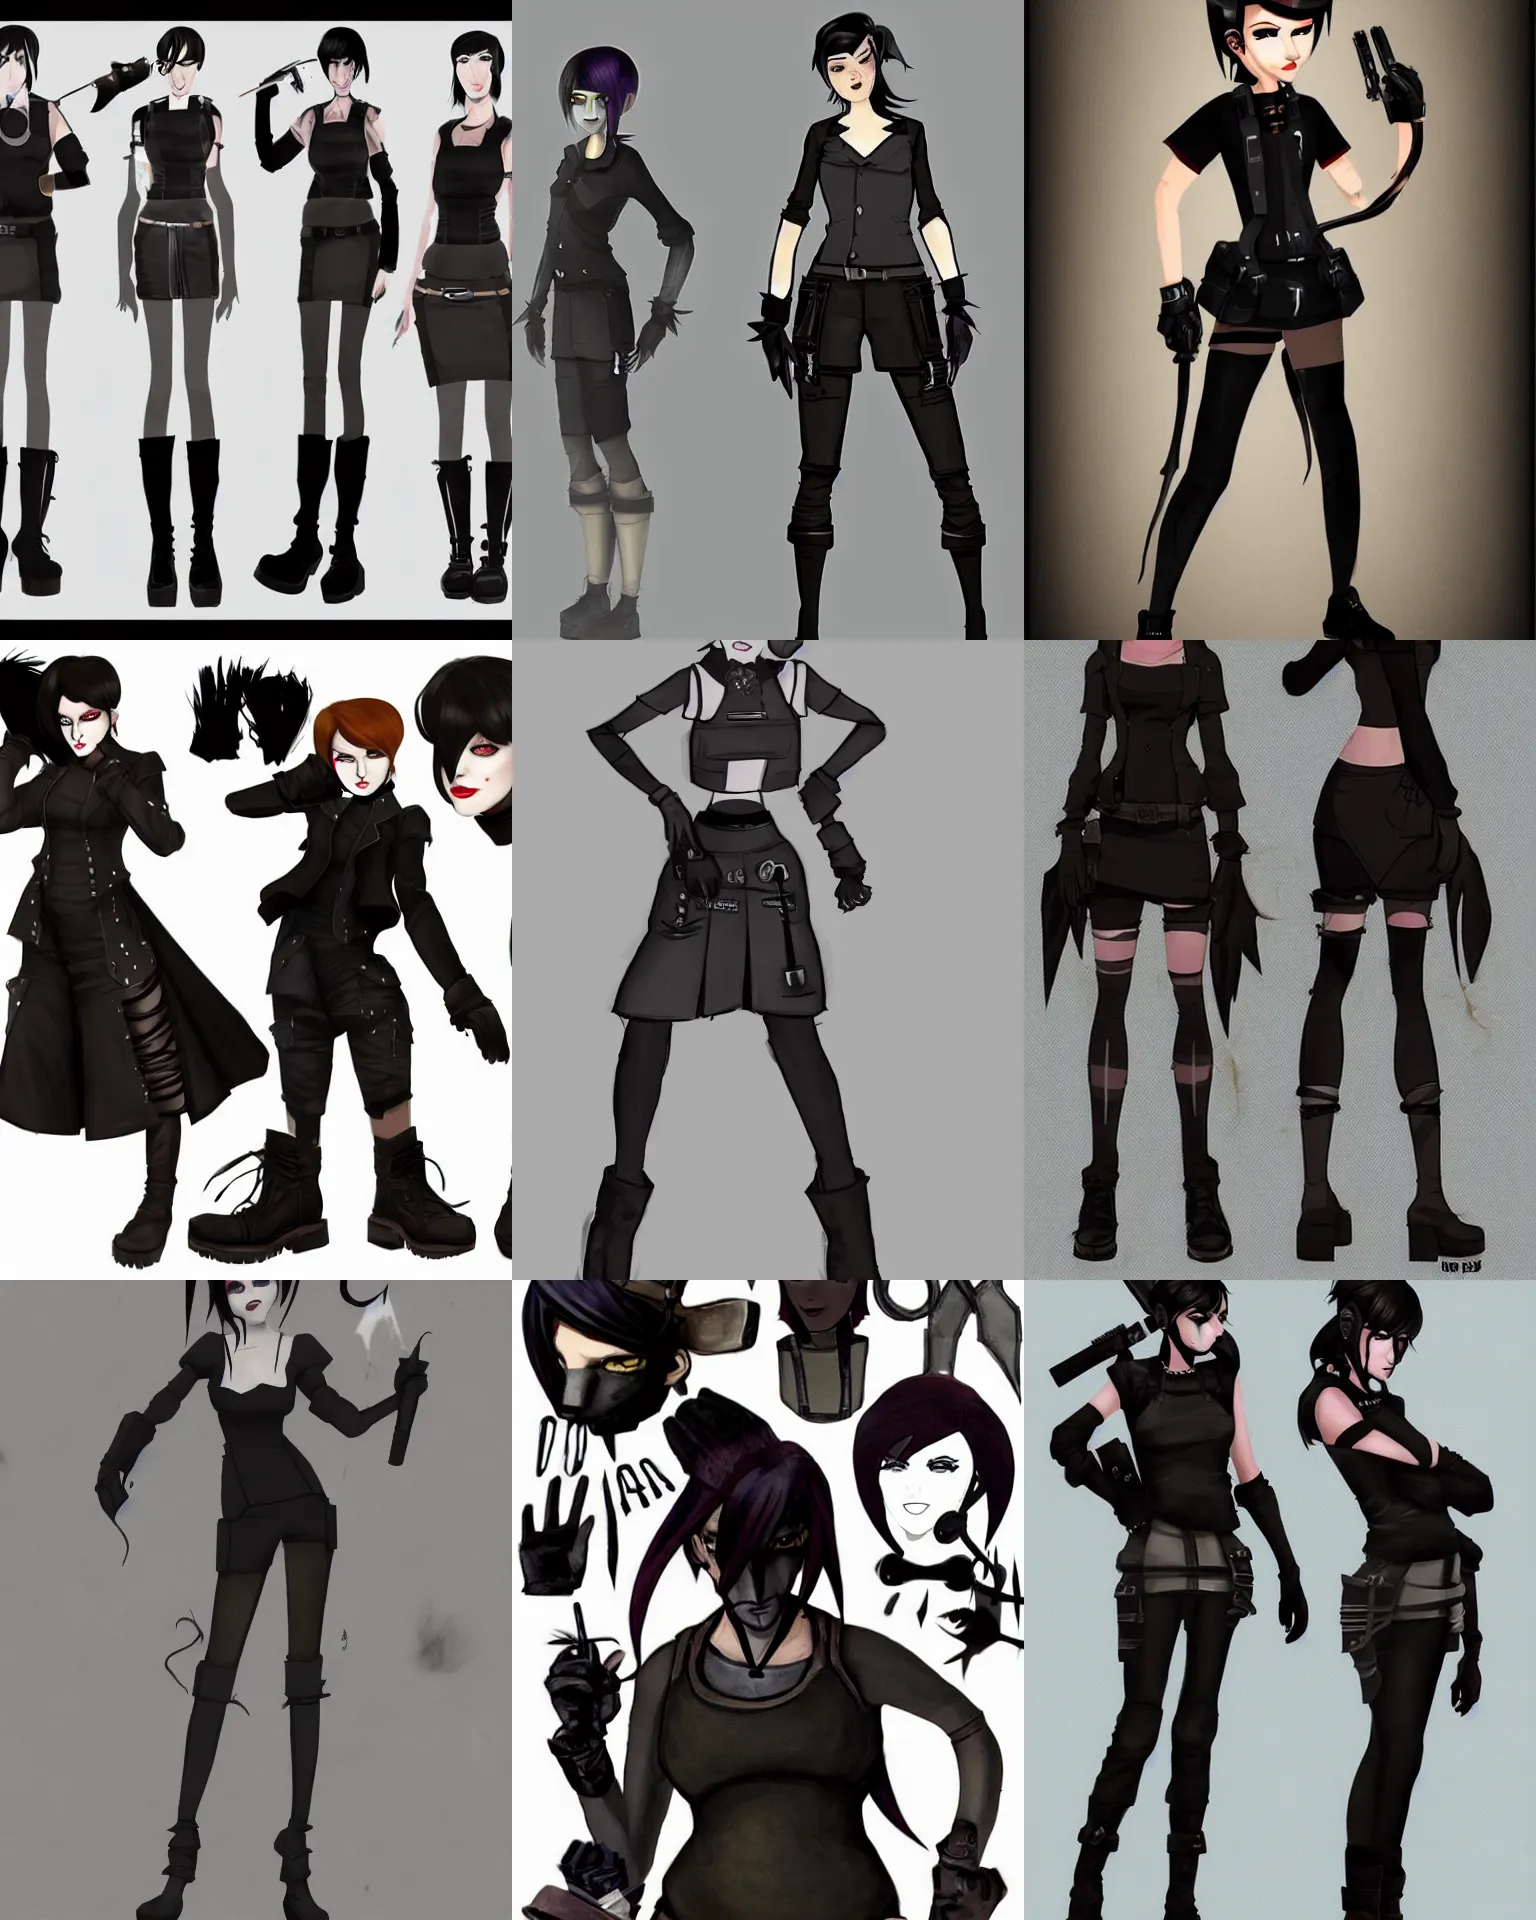 Prompt: goth Team Fortress 2 character concept art. Her hair is dark brown and cut into a short, messy pixie cut. She has a slightly rounded face, with a pointed chin, large entirely-black eyes, and a small nose. She is wearing a black tank top, a black leather jacket, a black knee-length skirt, a black choker, and black leather boots.